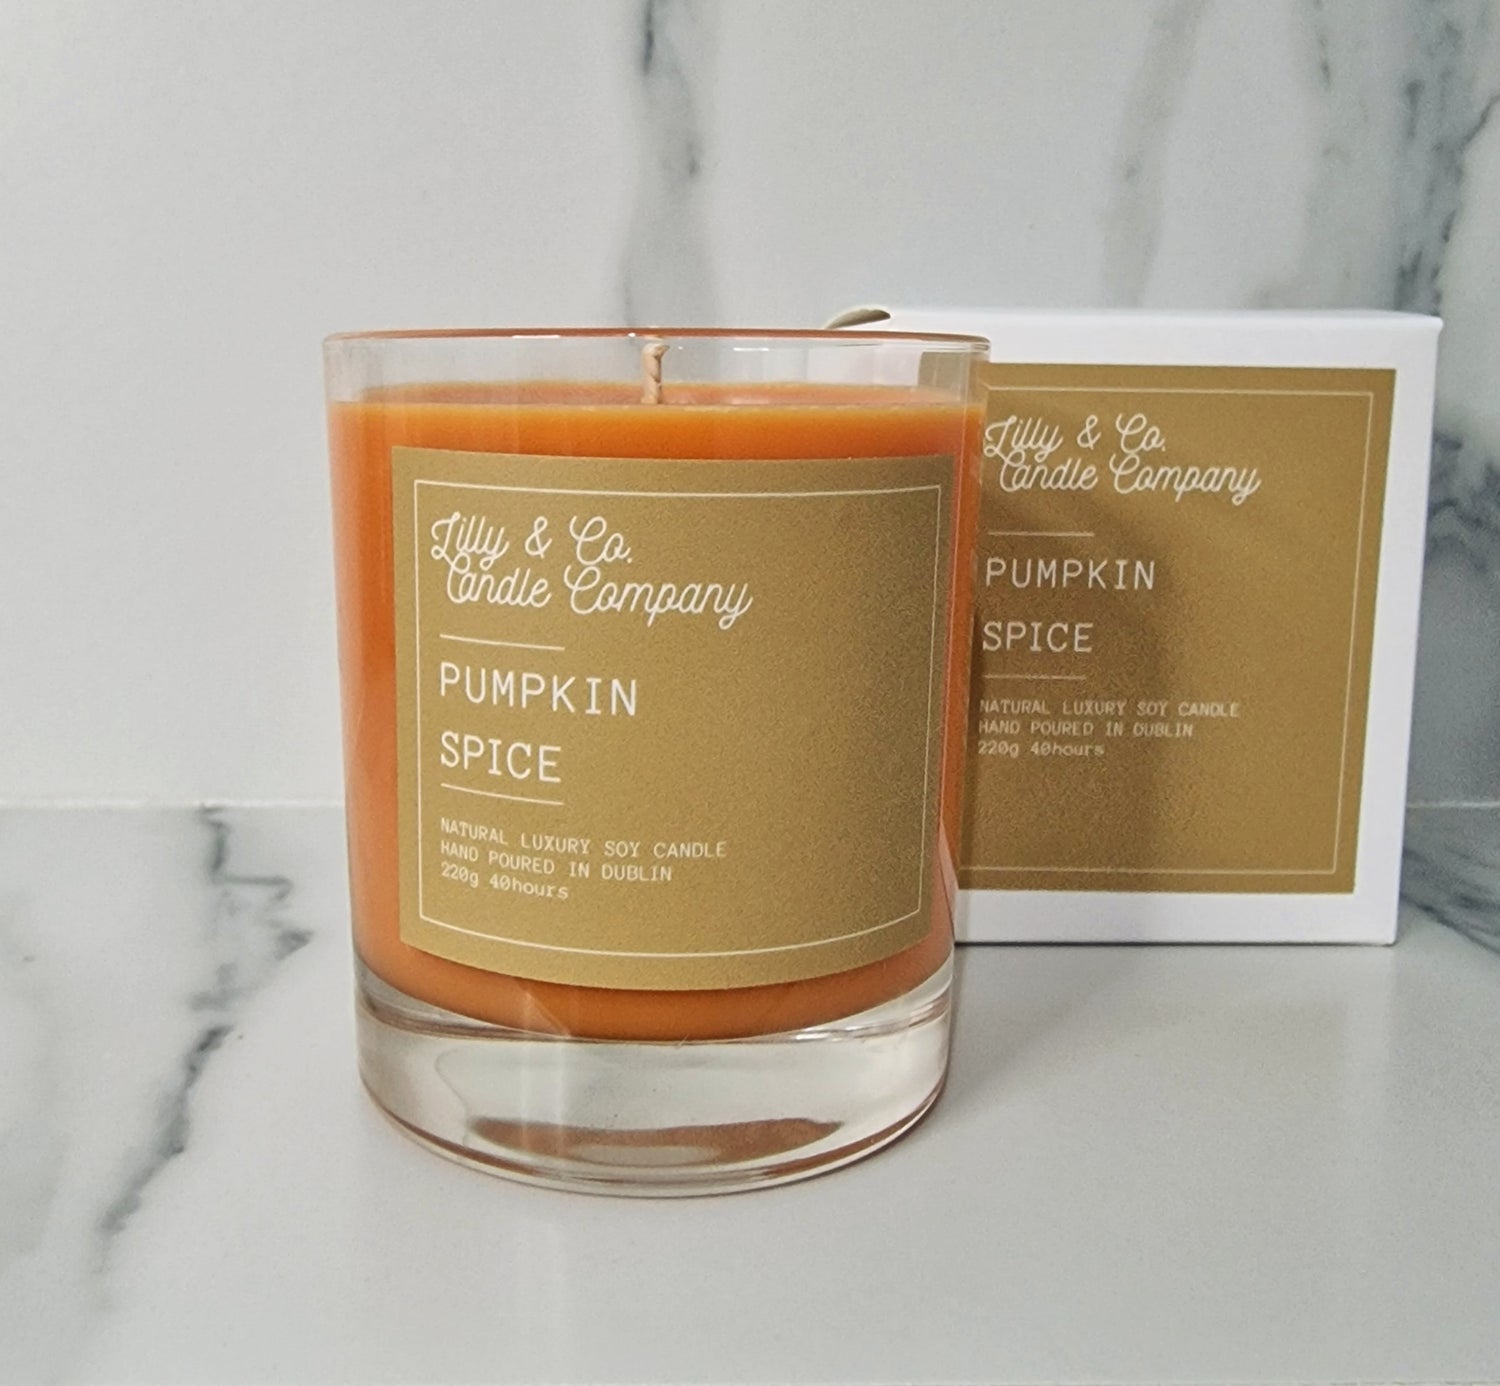 Pumpkin Spice 》Crackling Wood Wick Candle – Lilly & Co. Candle